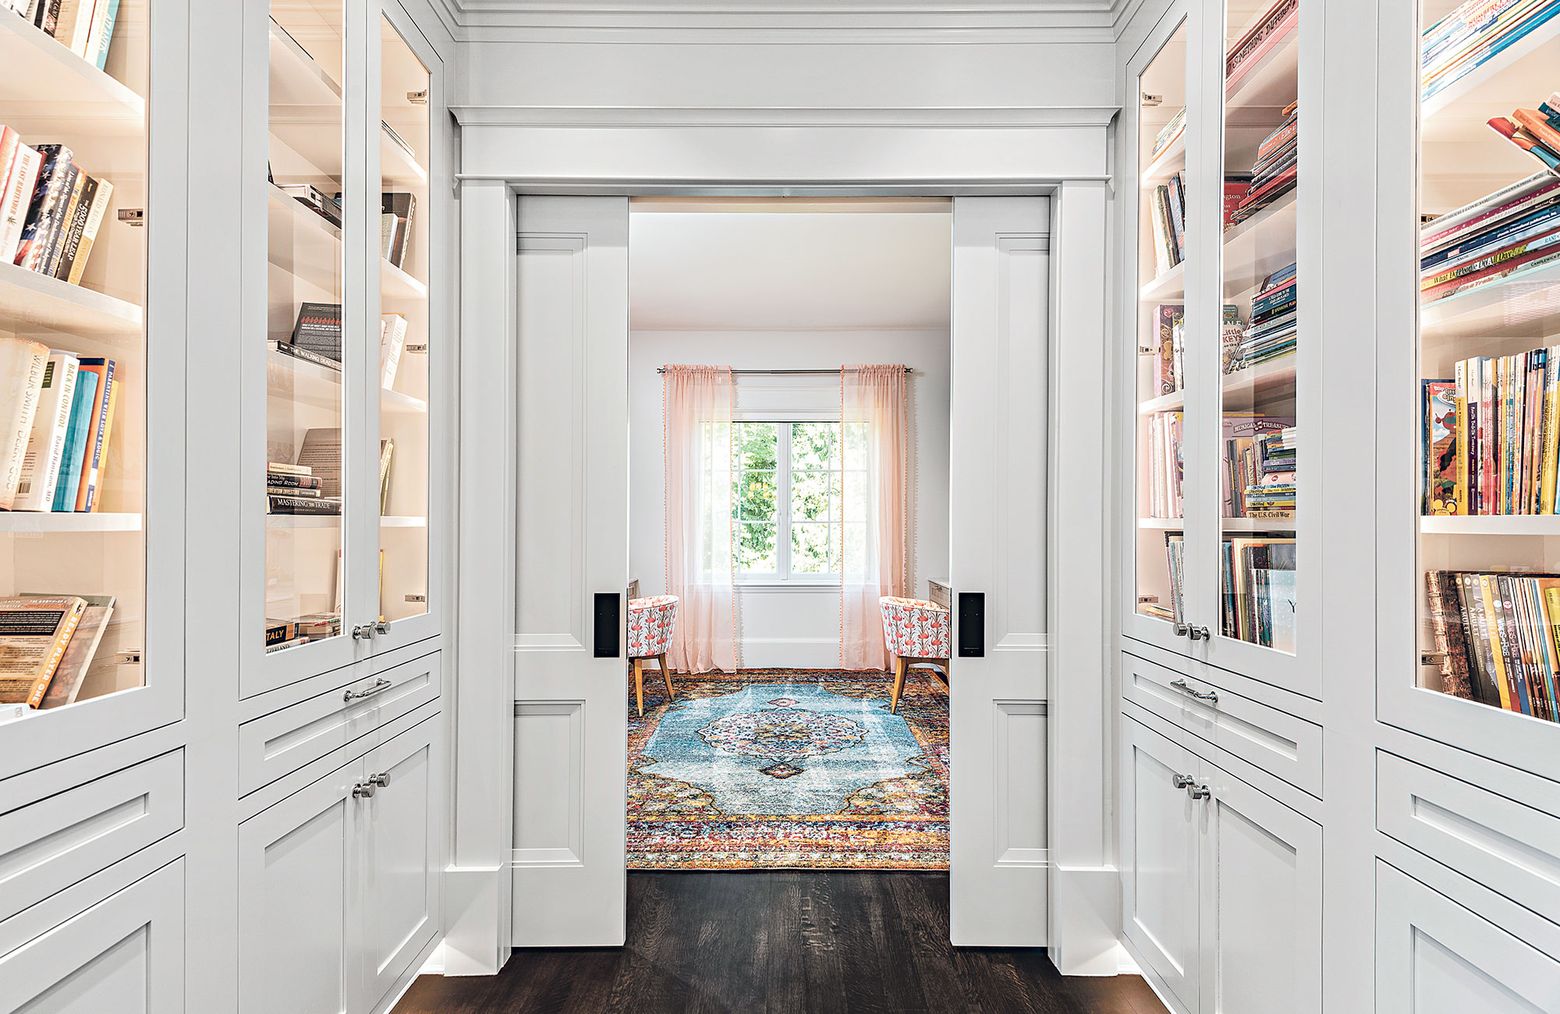 5 Cabinet Storage Ideas to Keep Every Room Organized, Architectural Digest